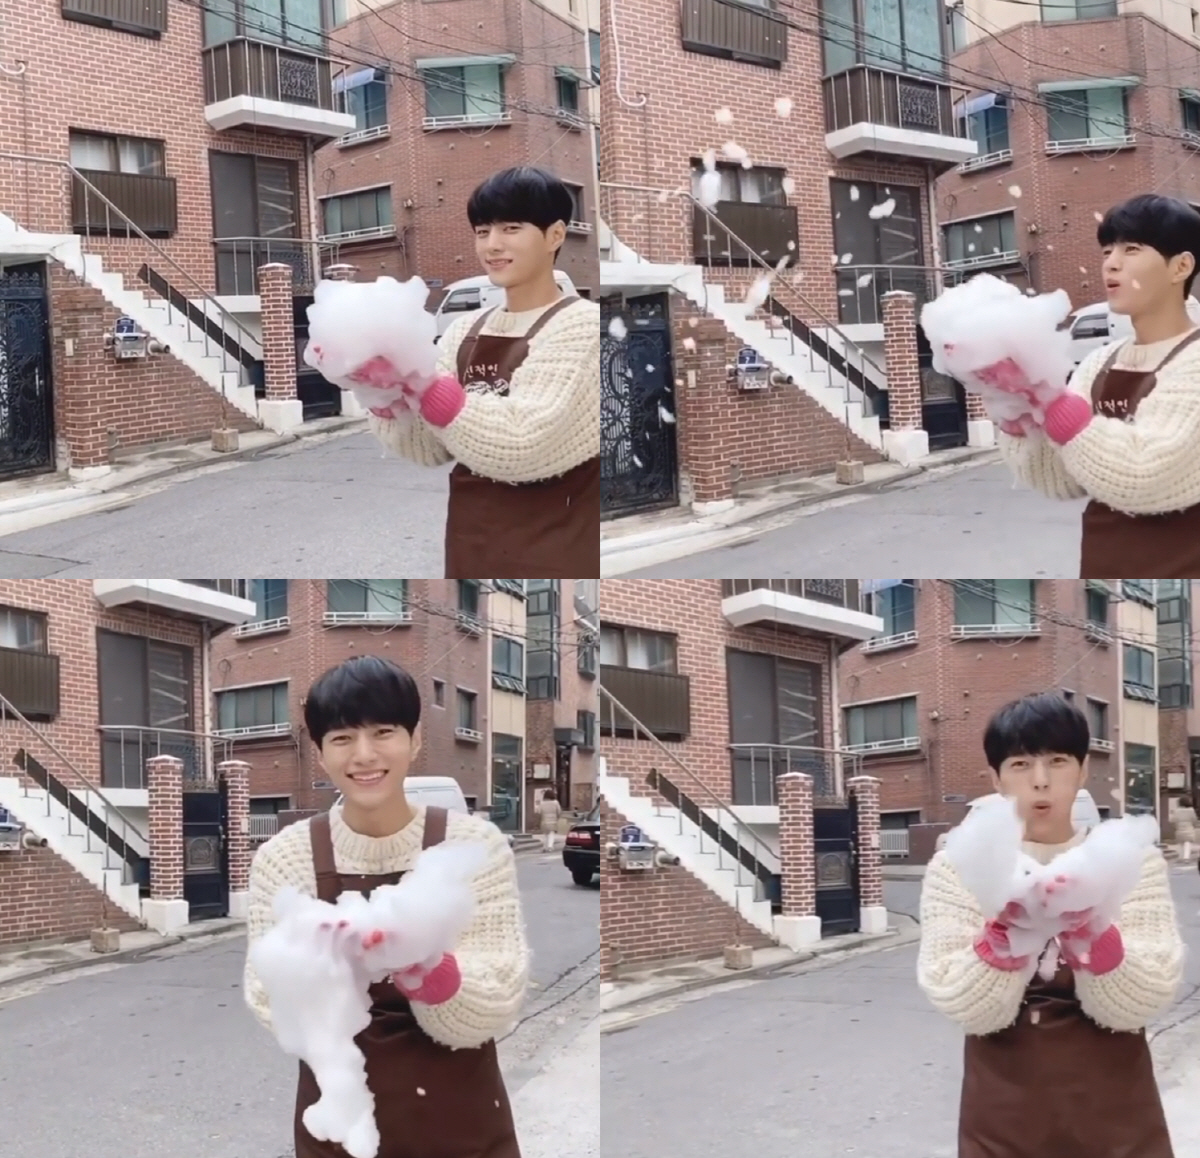 On the 9th, Myoeng-su Kim wrote on his official Instagram: Welcome, First Time in Korea? Flush. Myoeng-su Kim.Flush is good for bubbles and posted the video.In the public, Myoeng-su Kim, who wears a brown apron in an ivory knit, is delighted with his hands full of bubbles.KBS 2TV drama Welcome, First Time in Korea?Myoeng-su Kim, perfect for the inside Flush, captivated with a sunny Smile and a lovely atmosphere.Welcome, First Time in Korea?, which is broadcast every Wednesday night at 10 oclock, is a subtle romance drama of Cat and a puppy-like woman who turns into a man.Myoeng-su Kim - Shin Ye-eun - Seo Ji-hoon - Yoon Ye-ju - Kang Hoon and other youthful stars armed with their solid acting ability and distinctive personality attracted attention.Myoeng-su Kim plays the white Cat Flush, which turns into a human man only because of one woman.